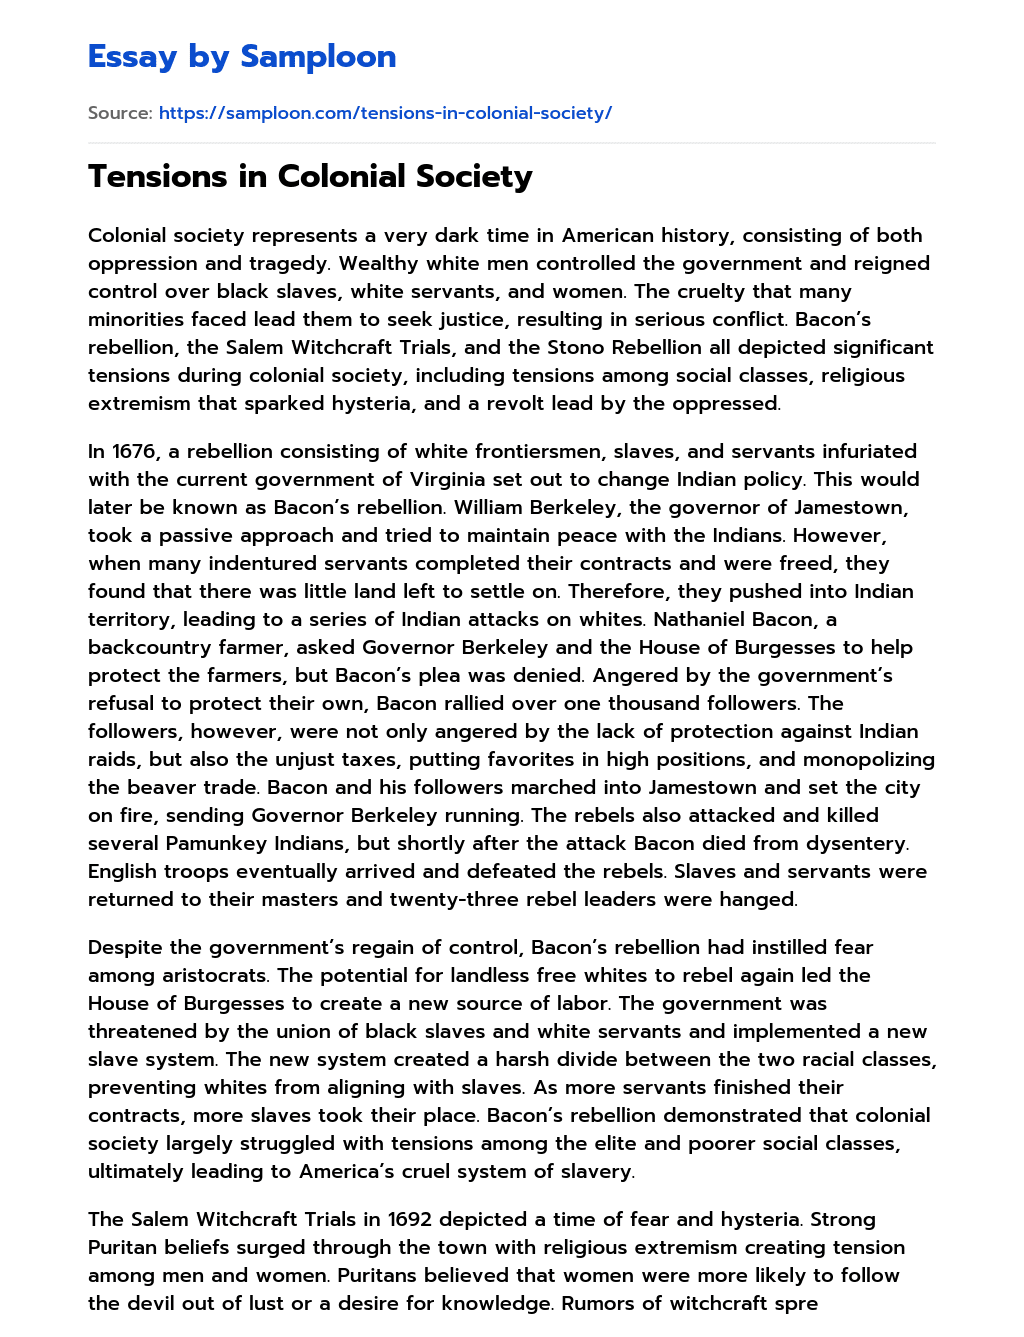 Tensions in Colonial Society essay